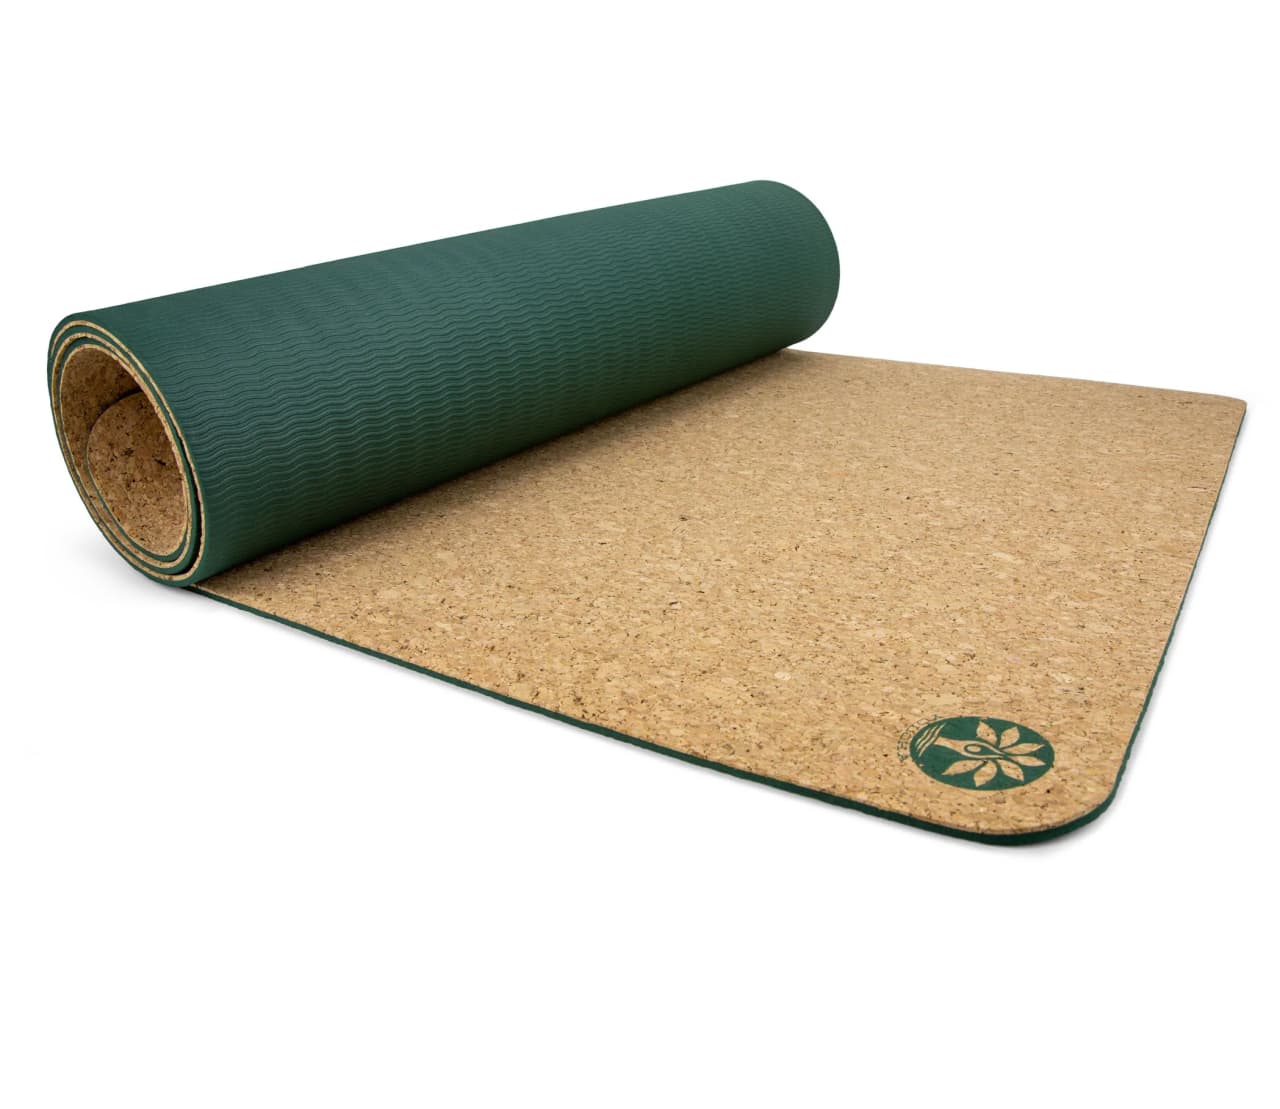 The 7 Best Yoga Mats for Finding Your Flow - Buy Side from WSJ